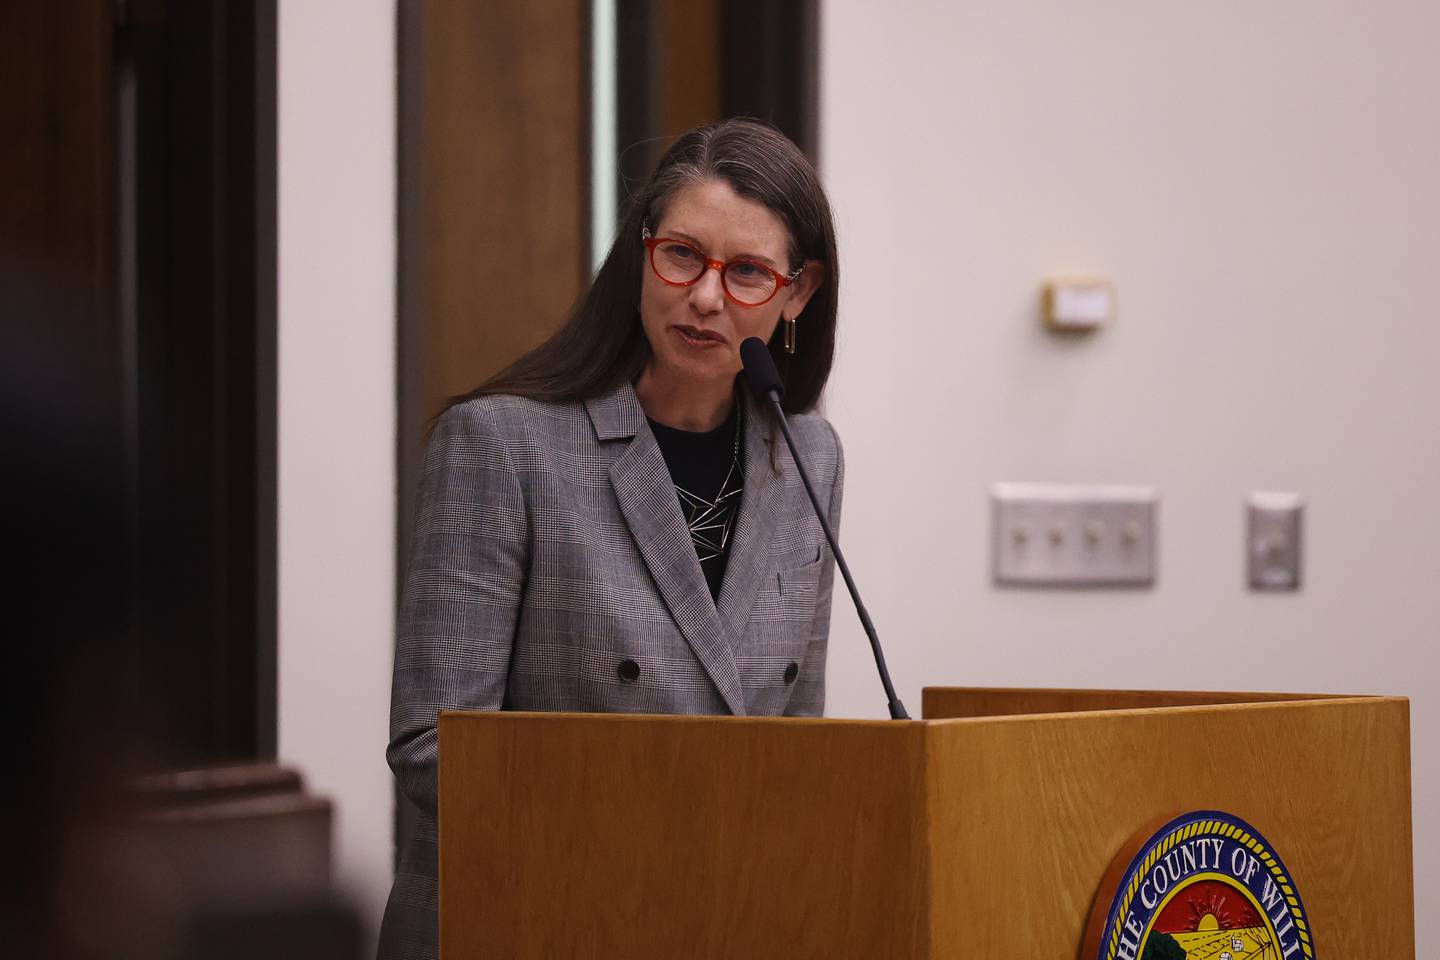 Bonnie McDonald, CEO Landmarks Illinois, speaks at a special meeting on the future of the old Will County Courthouse at the Will County board on Thursday, Aug. 17, 2023 in Joliet.